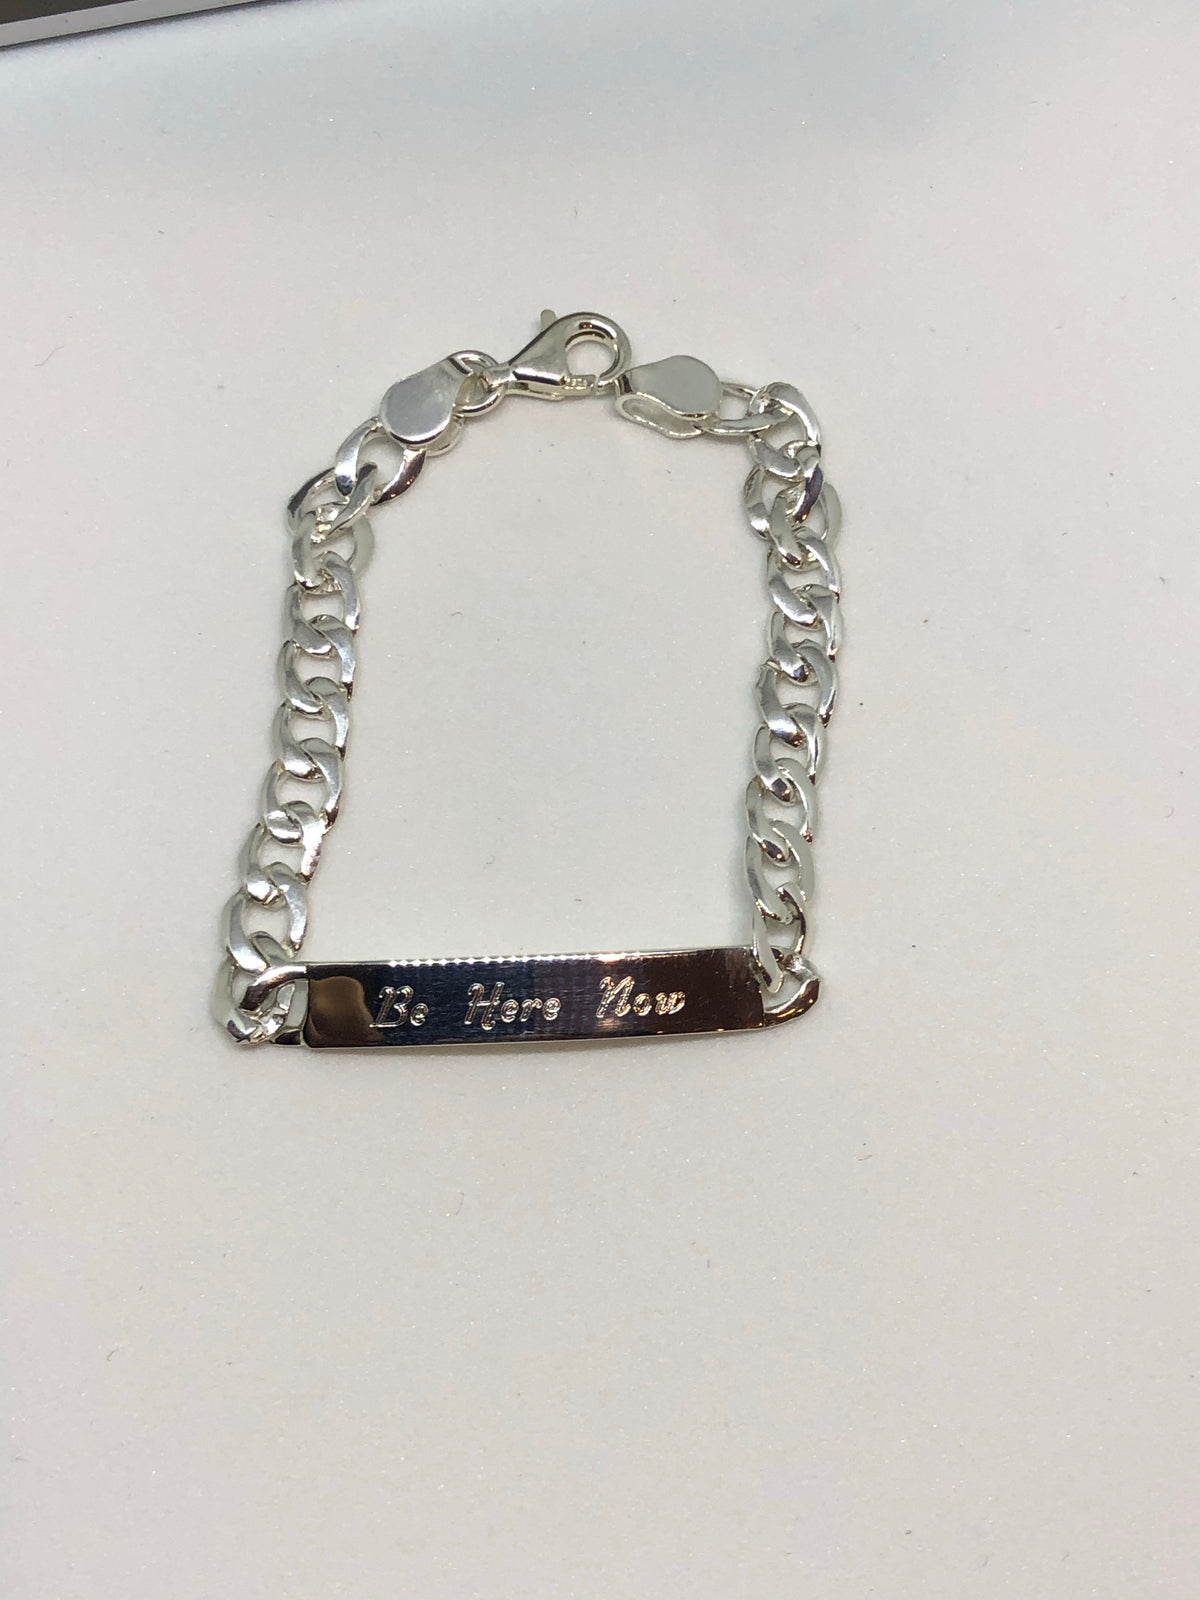 Solid Sterling Silver Personalized Child & Adult size ID Plate Curb Link 5mm Bracelet 6 inch & 7.25 inch